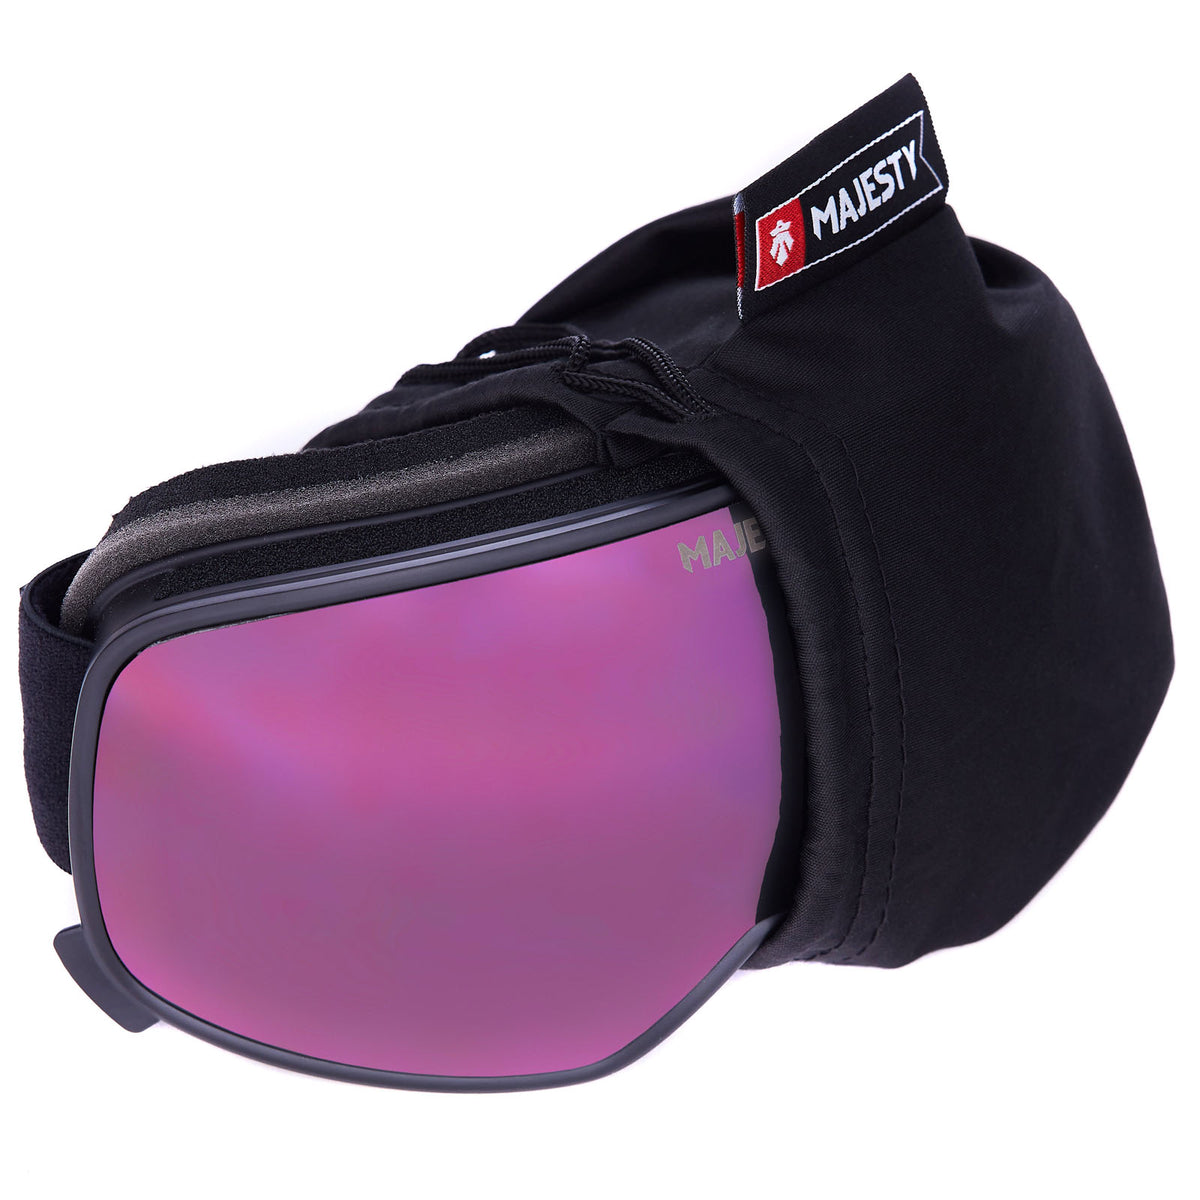 FORCE-S Women's Snow Goggle - Black Frame with Pink Amethyst Lens